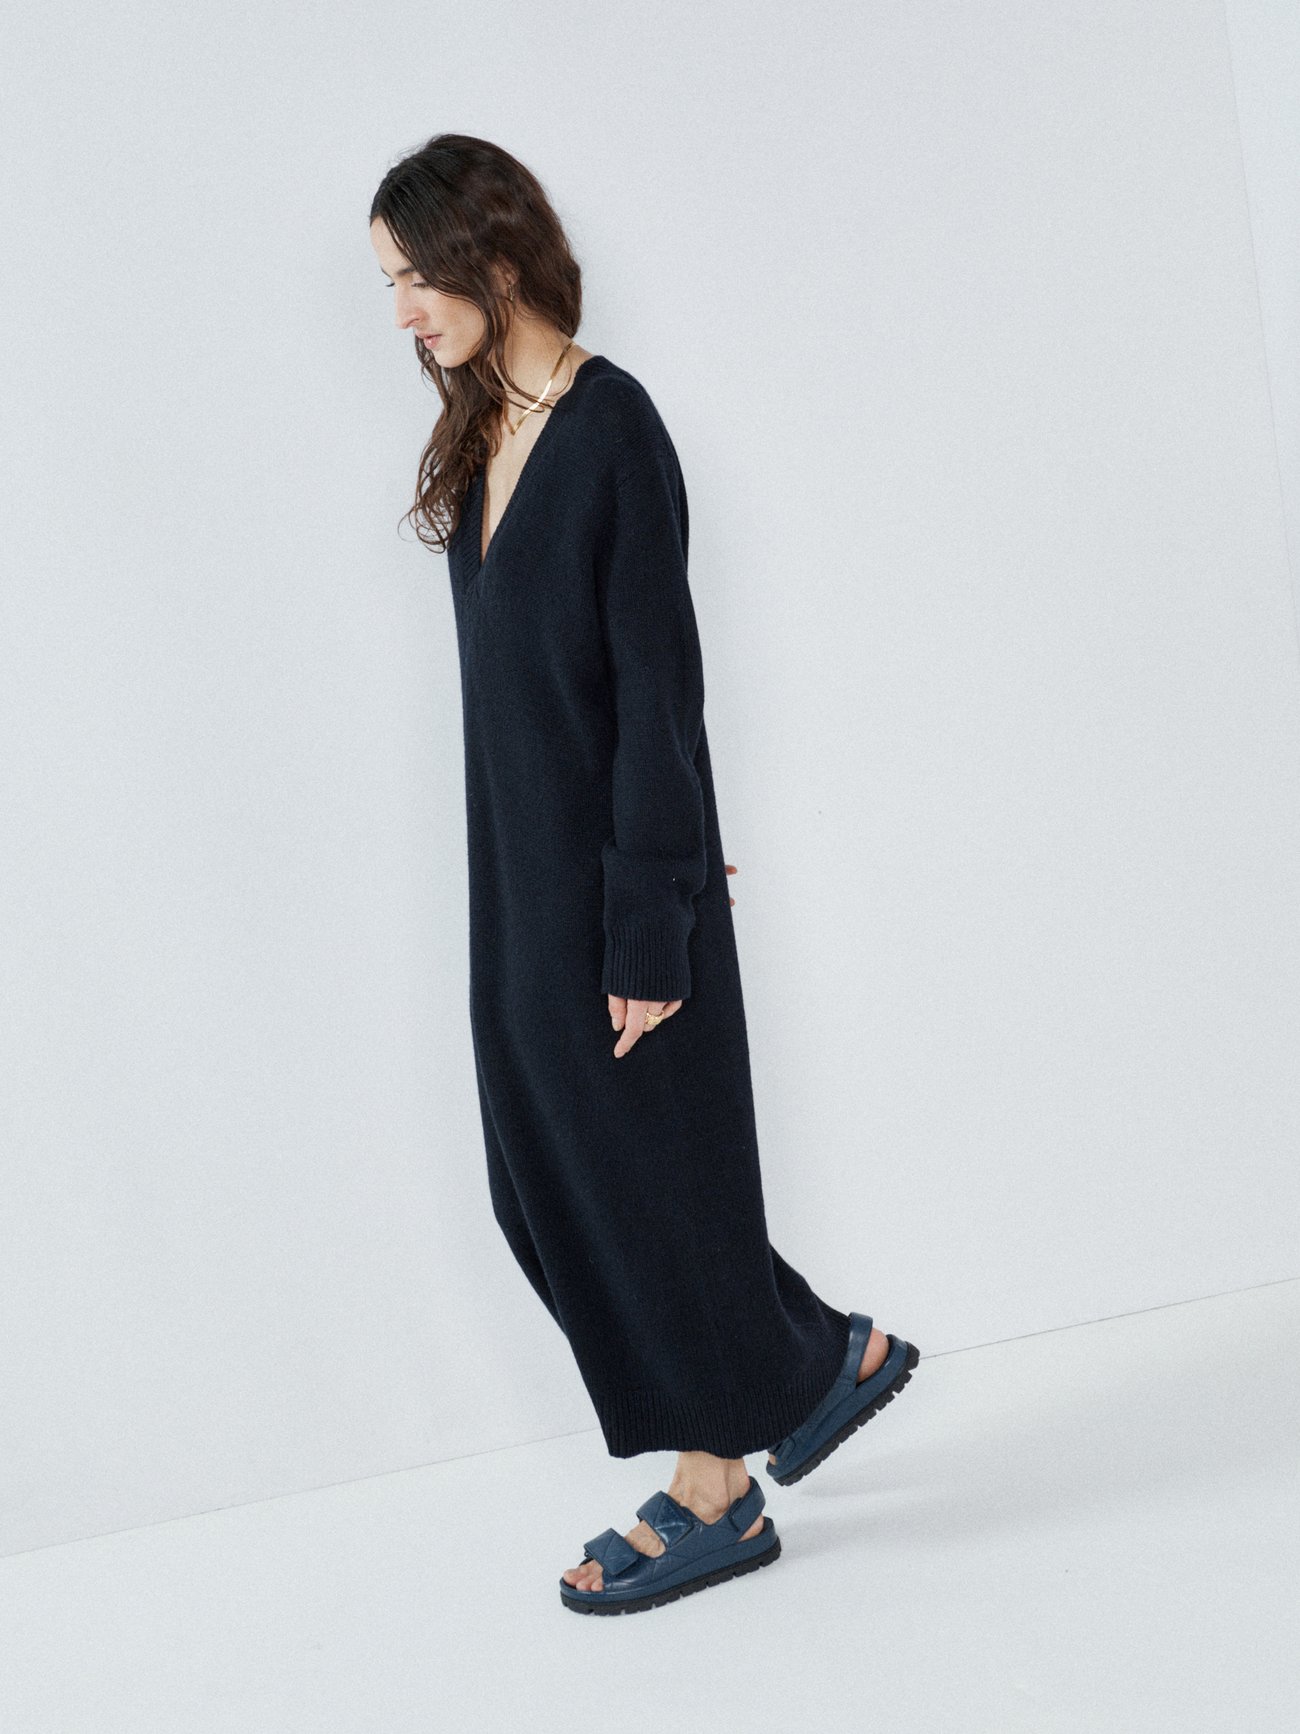 Spun from recycled cashmere and wool, Raey’s navy dress features a deep V-neckline, dropped shoulders and a floor-grazing length for a relaxed mood.